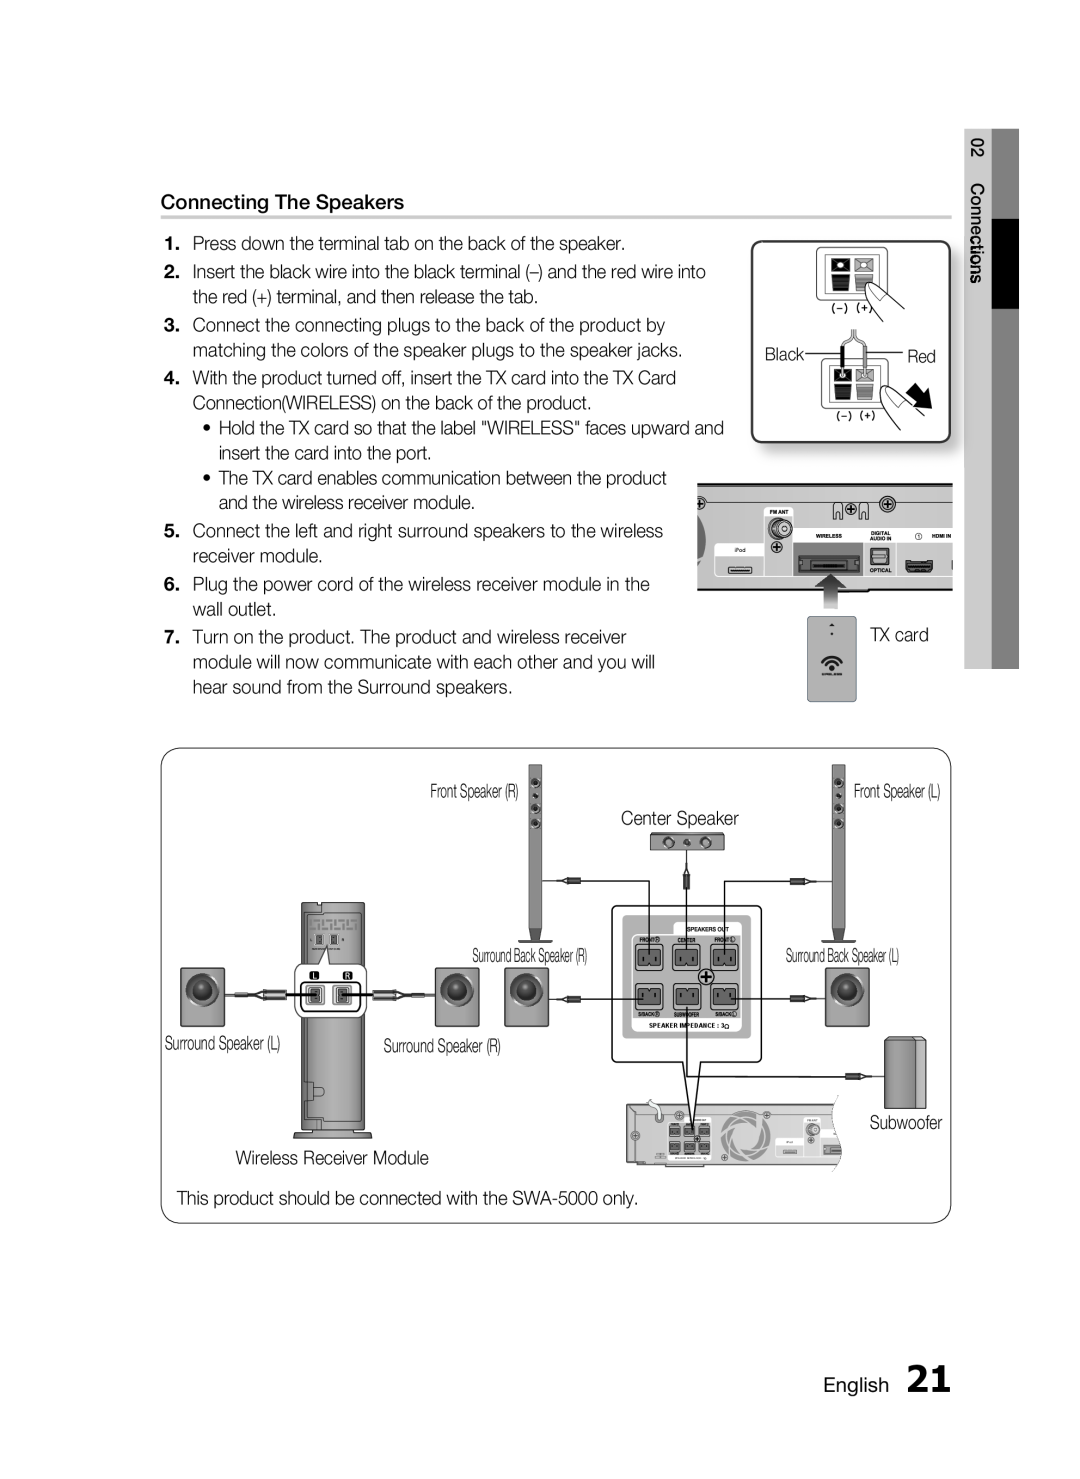 Samsung HT-C6730W, AH68-02290S user manual Connecting The Speakers, English, receiver module 